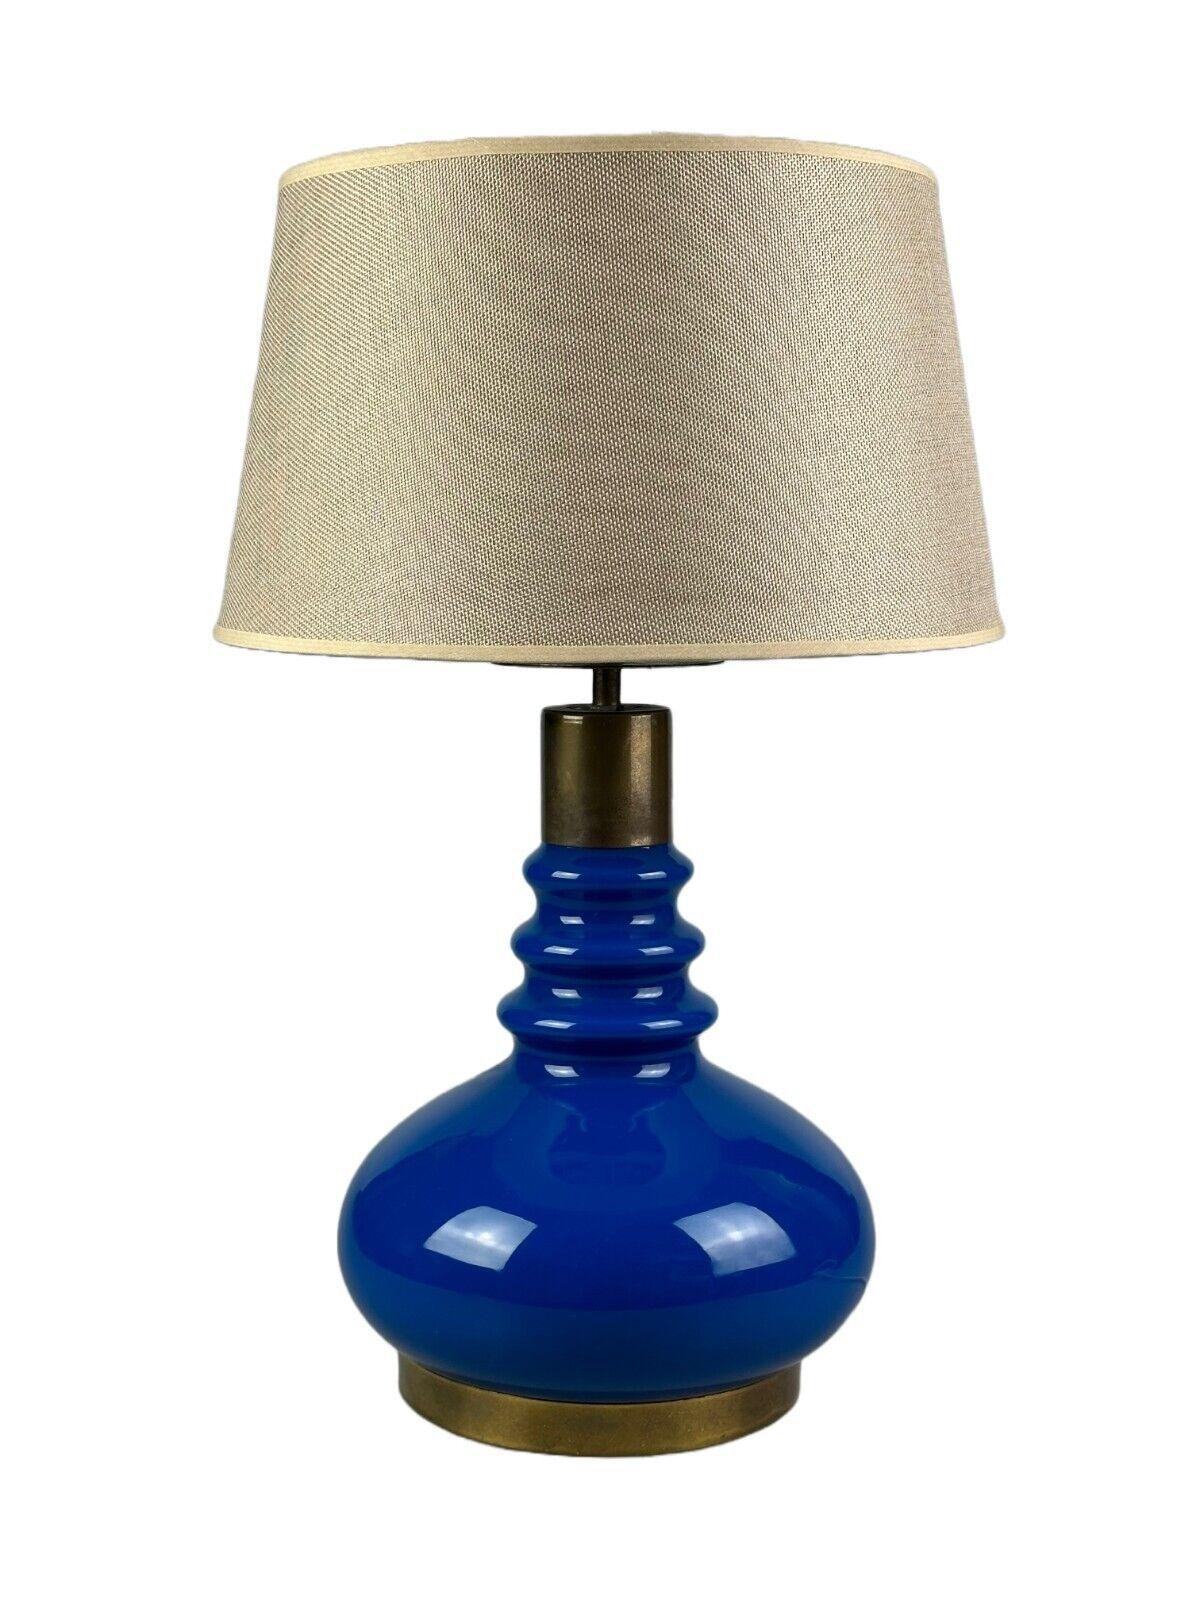 60s 70s table lamp with fabric shade made of glass & brass Germany Space Age

Object: table lamp

Manufacturer:

Condition: good

Age: around 1960-1970

Dimensions:

Diameter = 35cm
Height = 54cm

Material: glass, metal, brass, fabric

Other